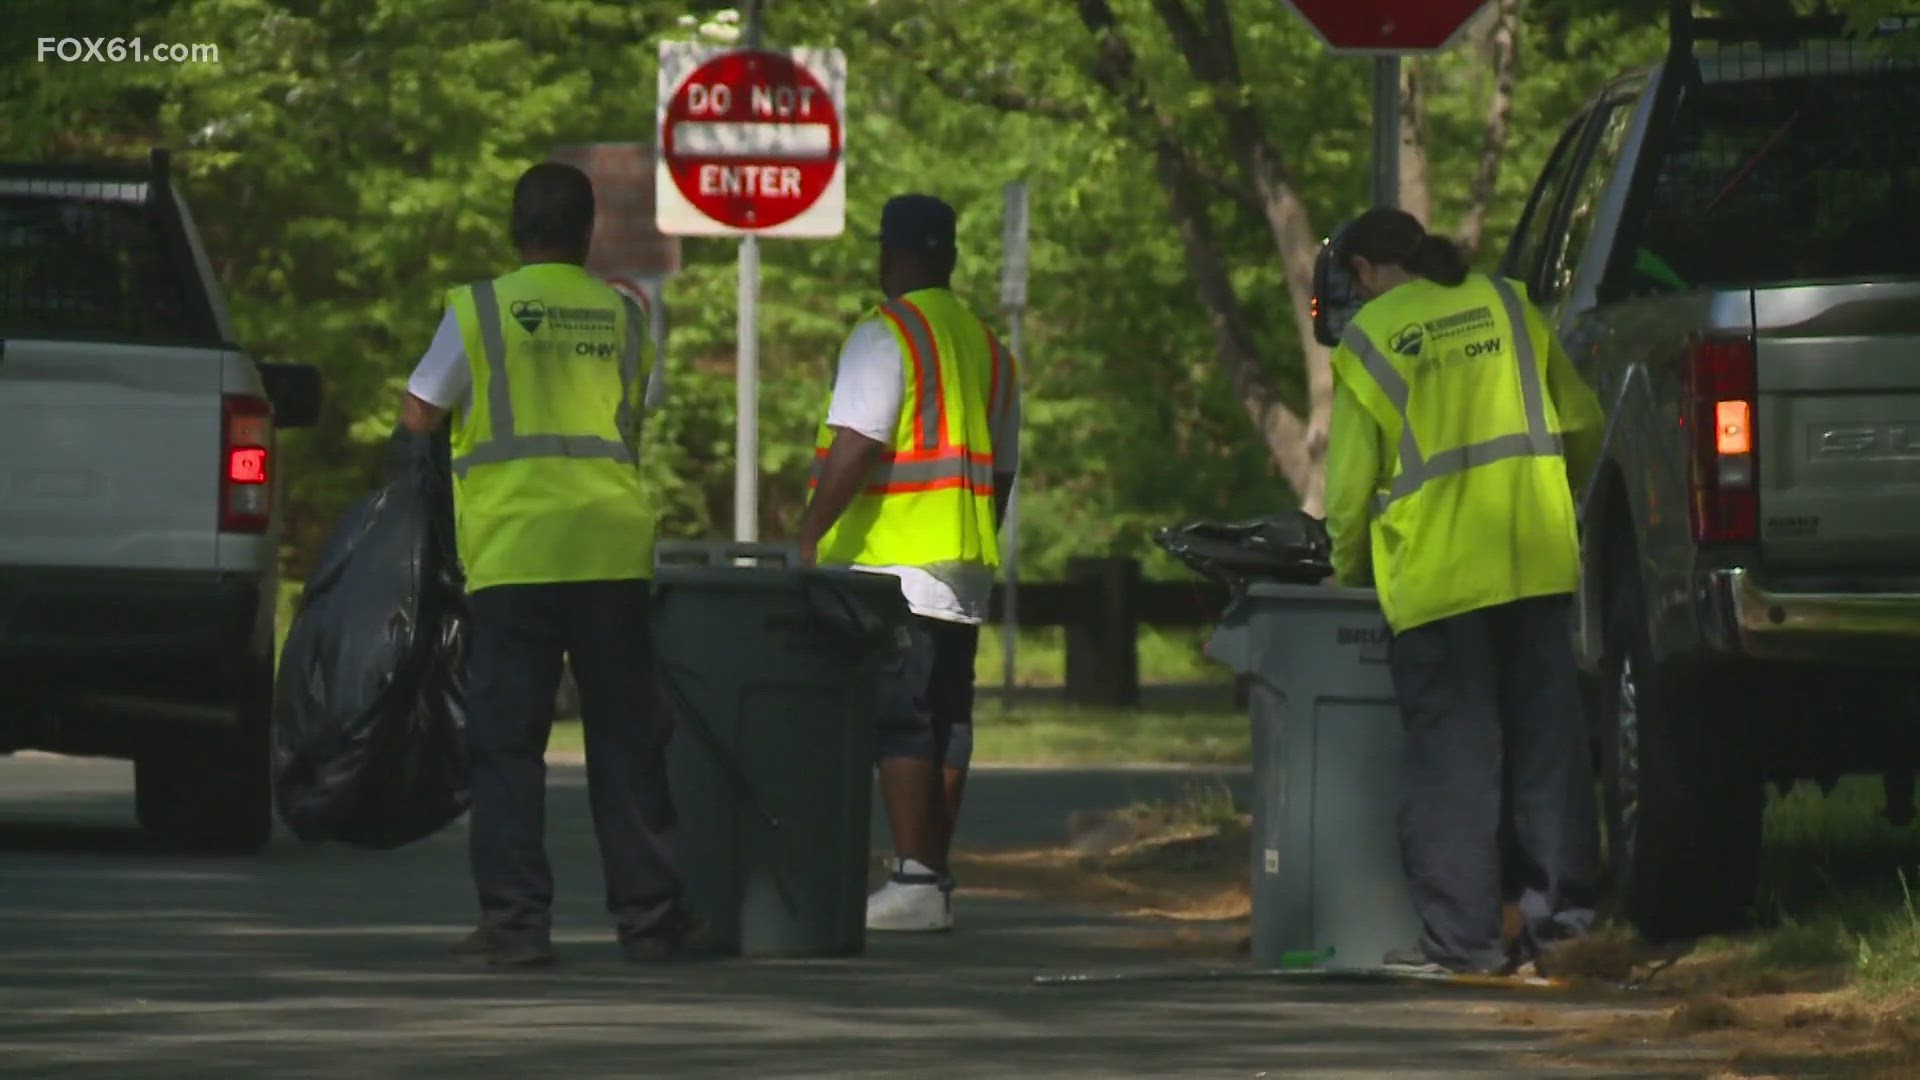 Hartford's Ambassadors program has people who were formerly incarcerated keep the city's streets clean and gives them opportunities.